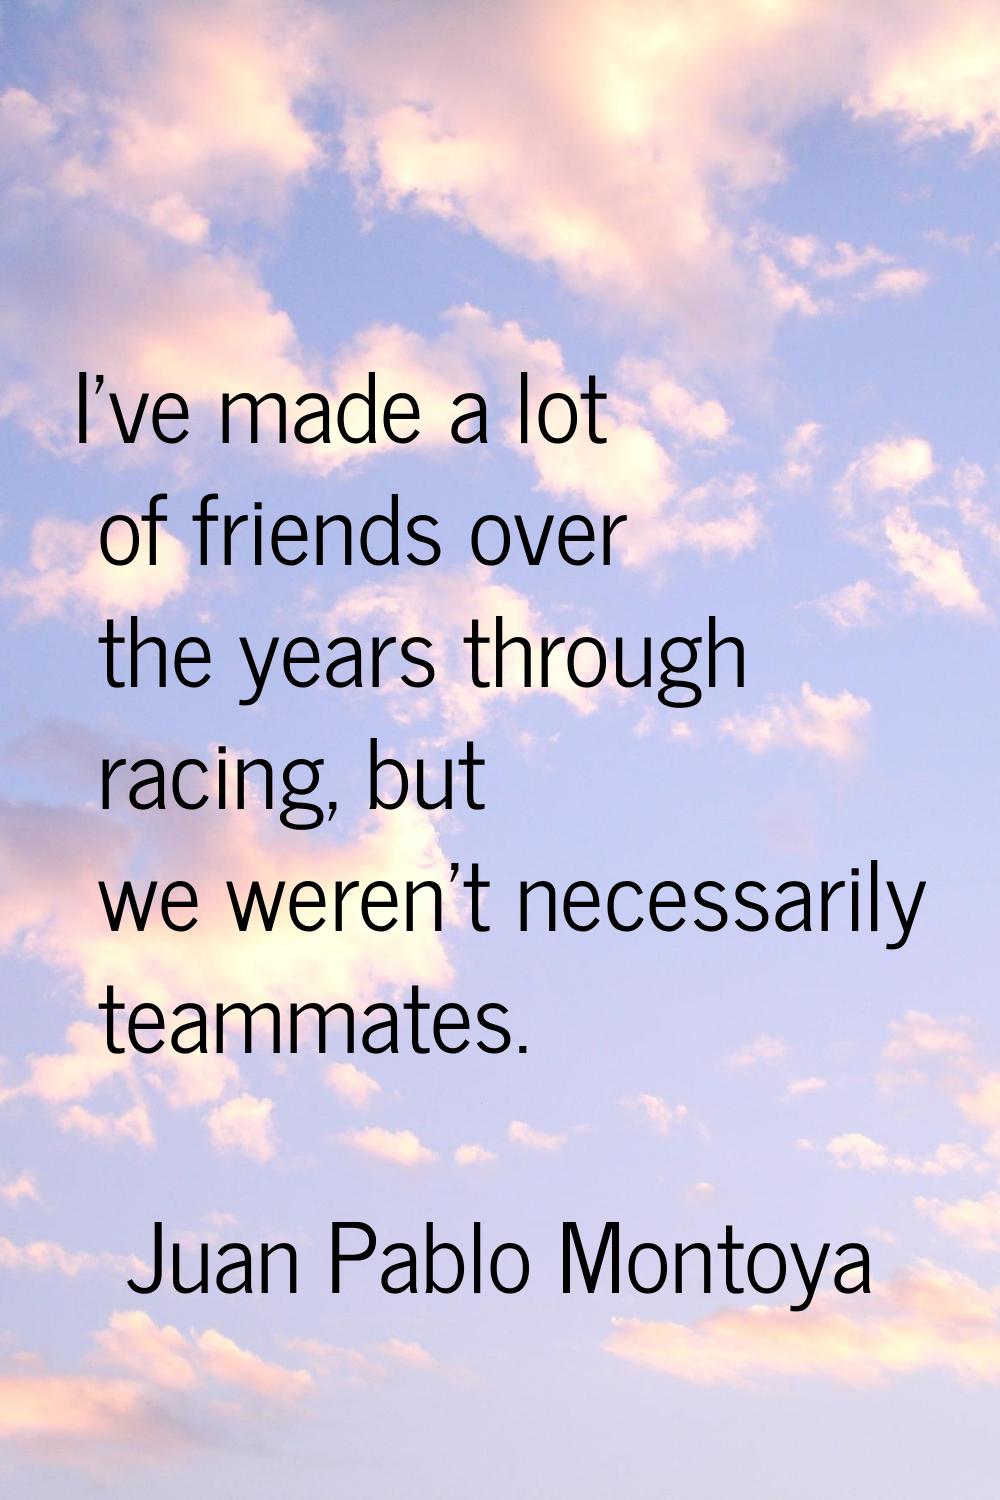 I've made a lot of friends over the years through racing, but we weren't necessarily teammates.